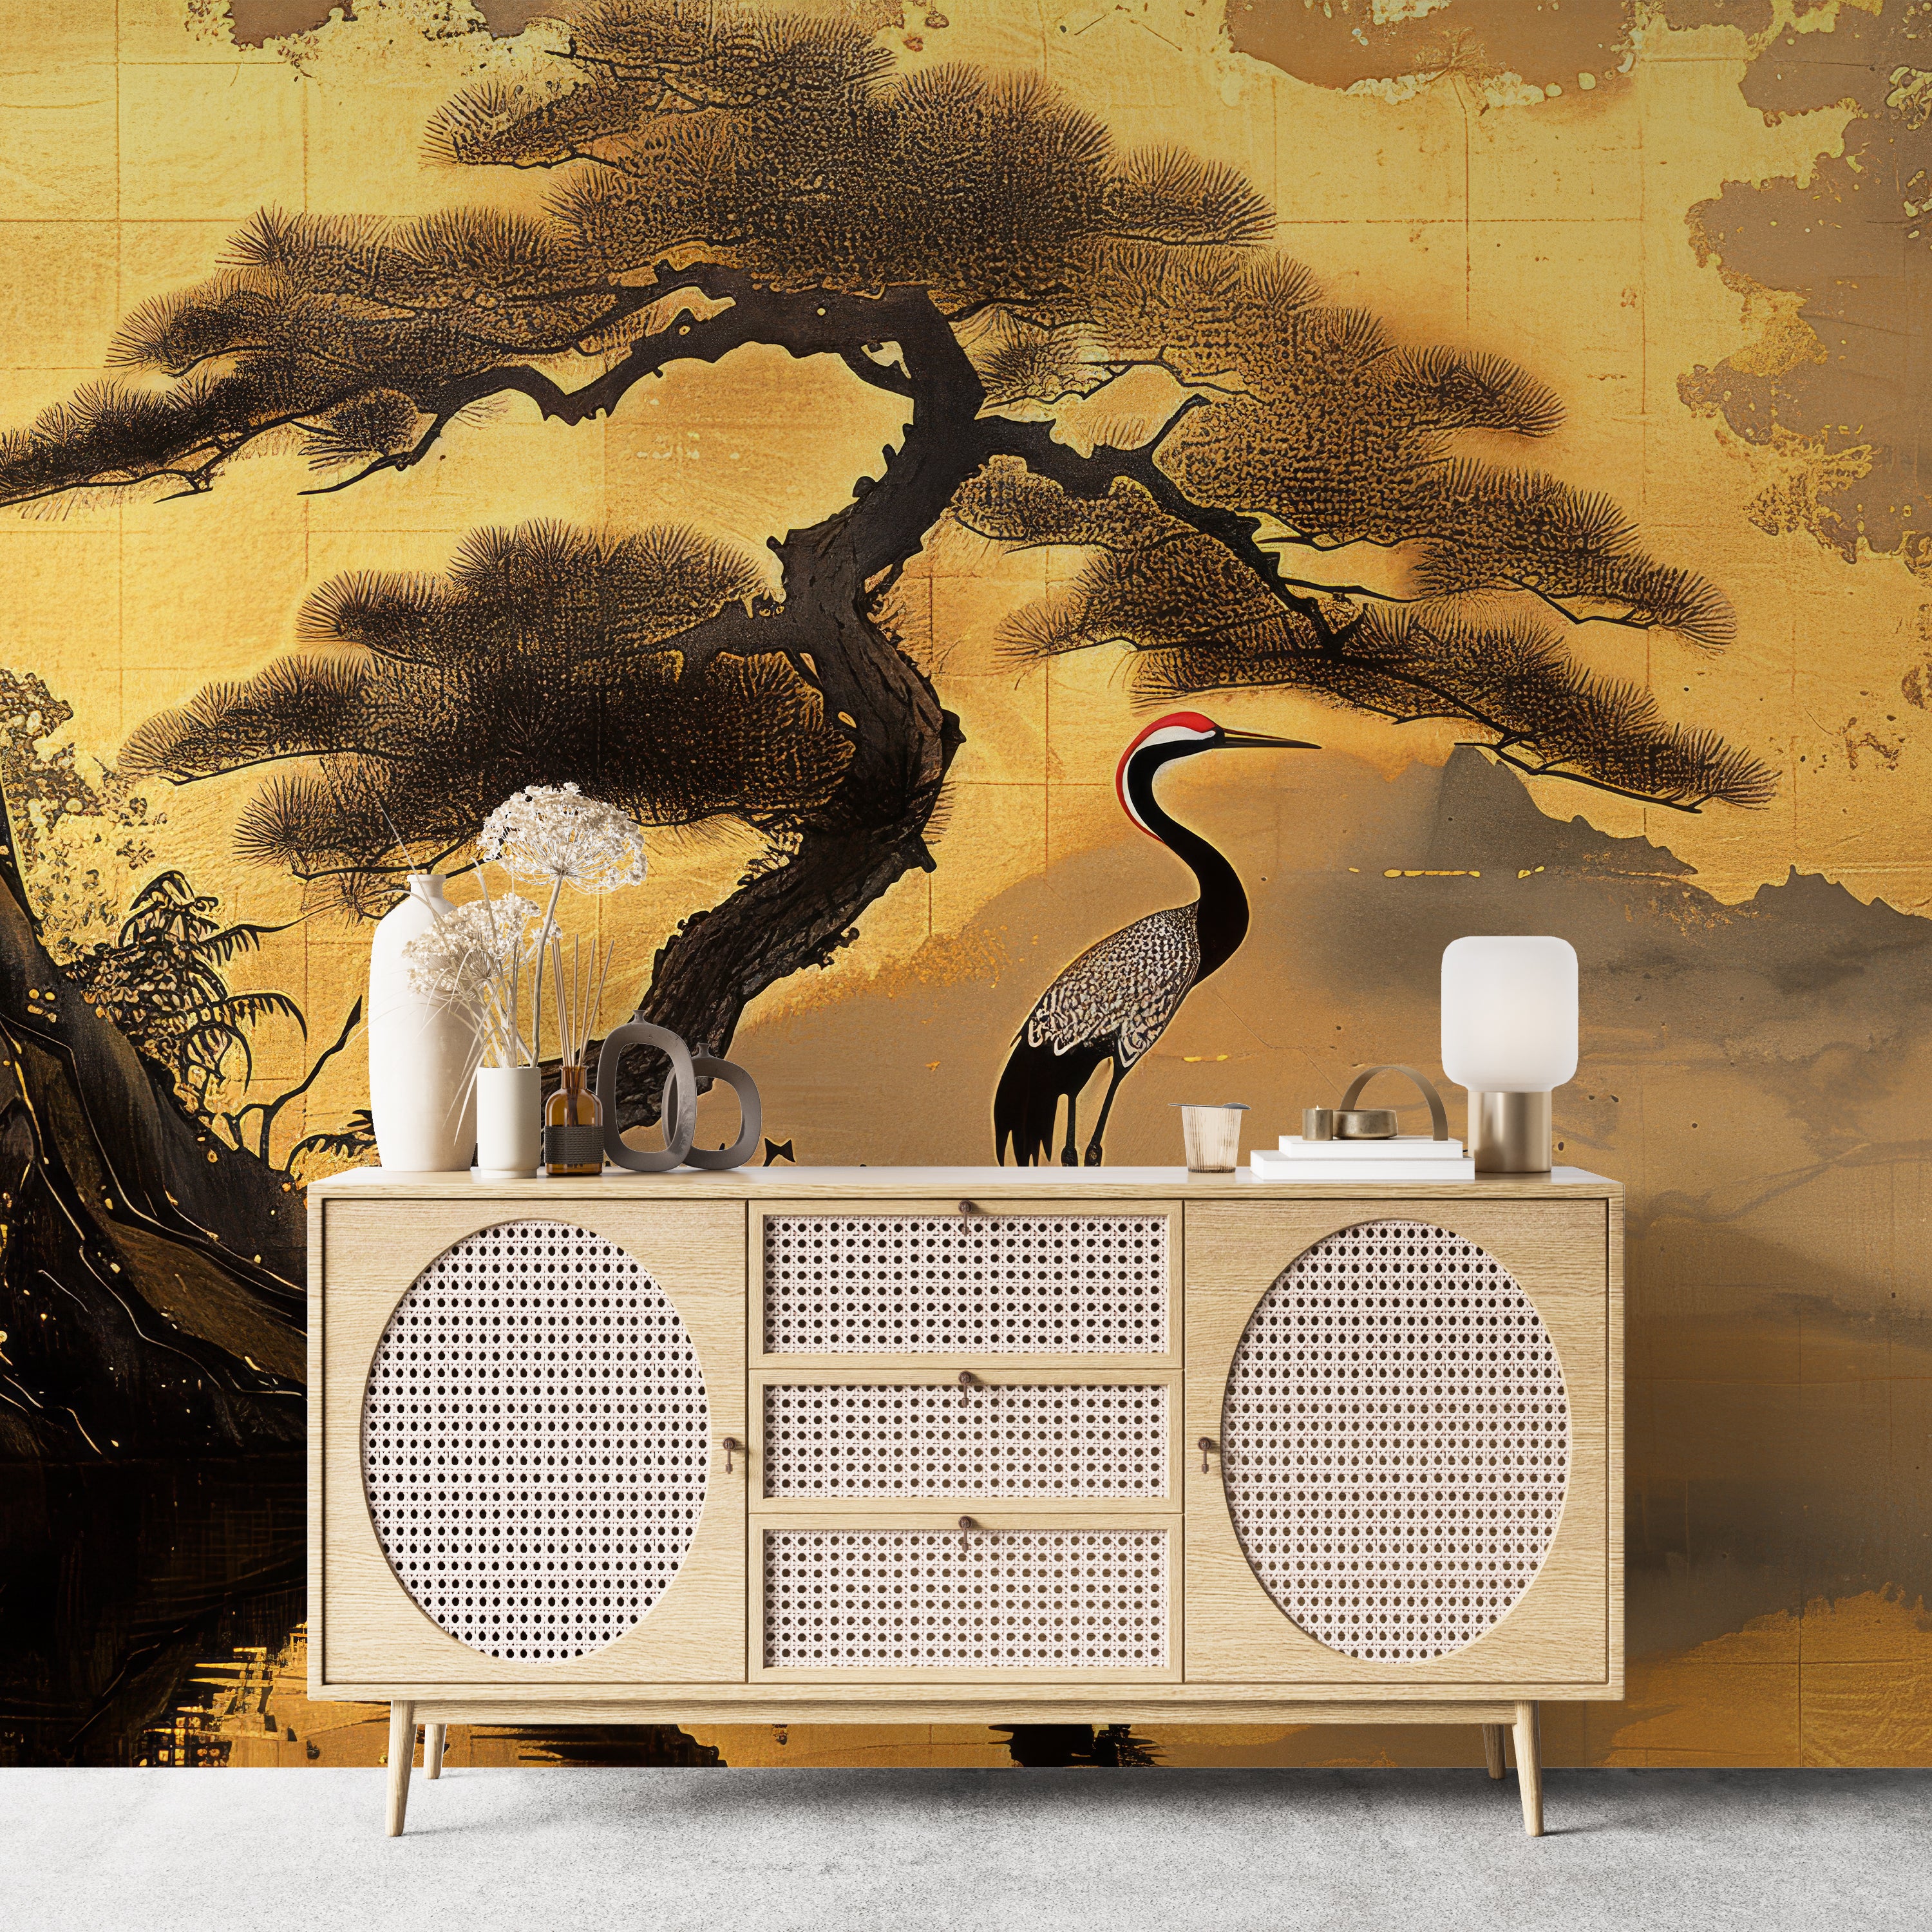 Eternal Tranquility: Panoramic Wallpaper Inspired by Japanese Art